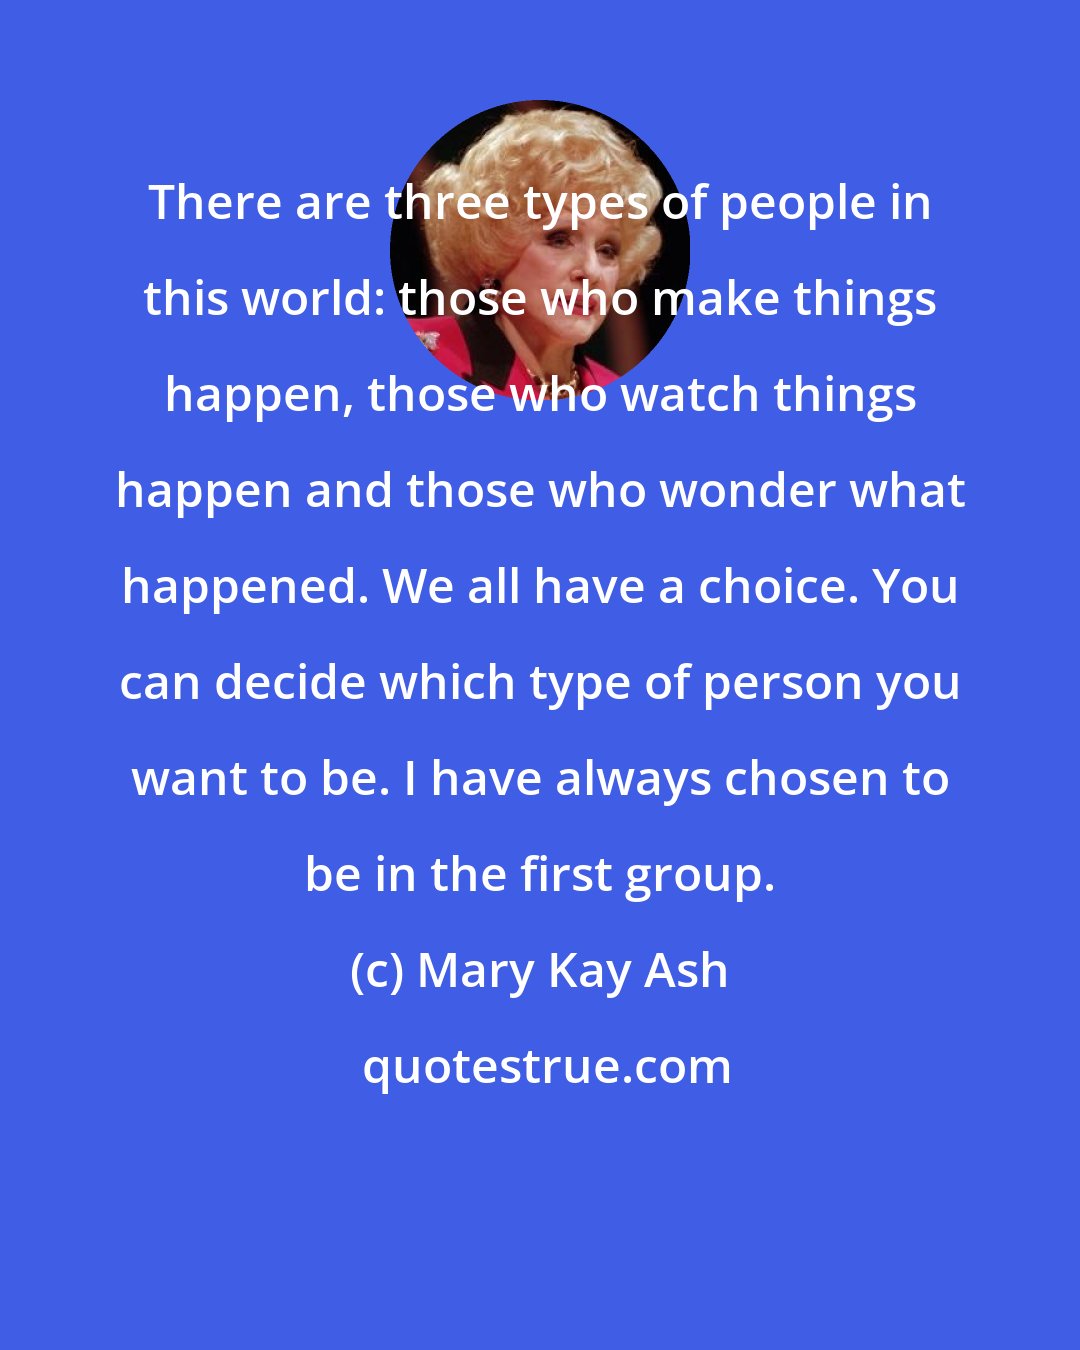 Mary Kay Ash: There are three types of people in this world: those who make things happen, those who watch things happen and those who wonder what happened. We all have a choice. You can decide which type of person you want to be. I have always chosen to be in the first group.